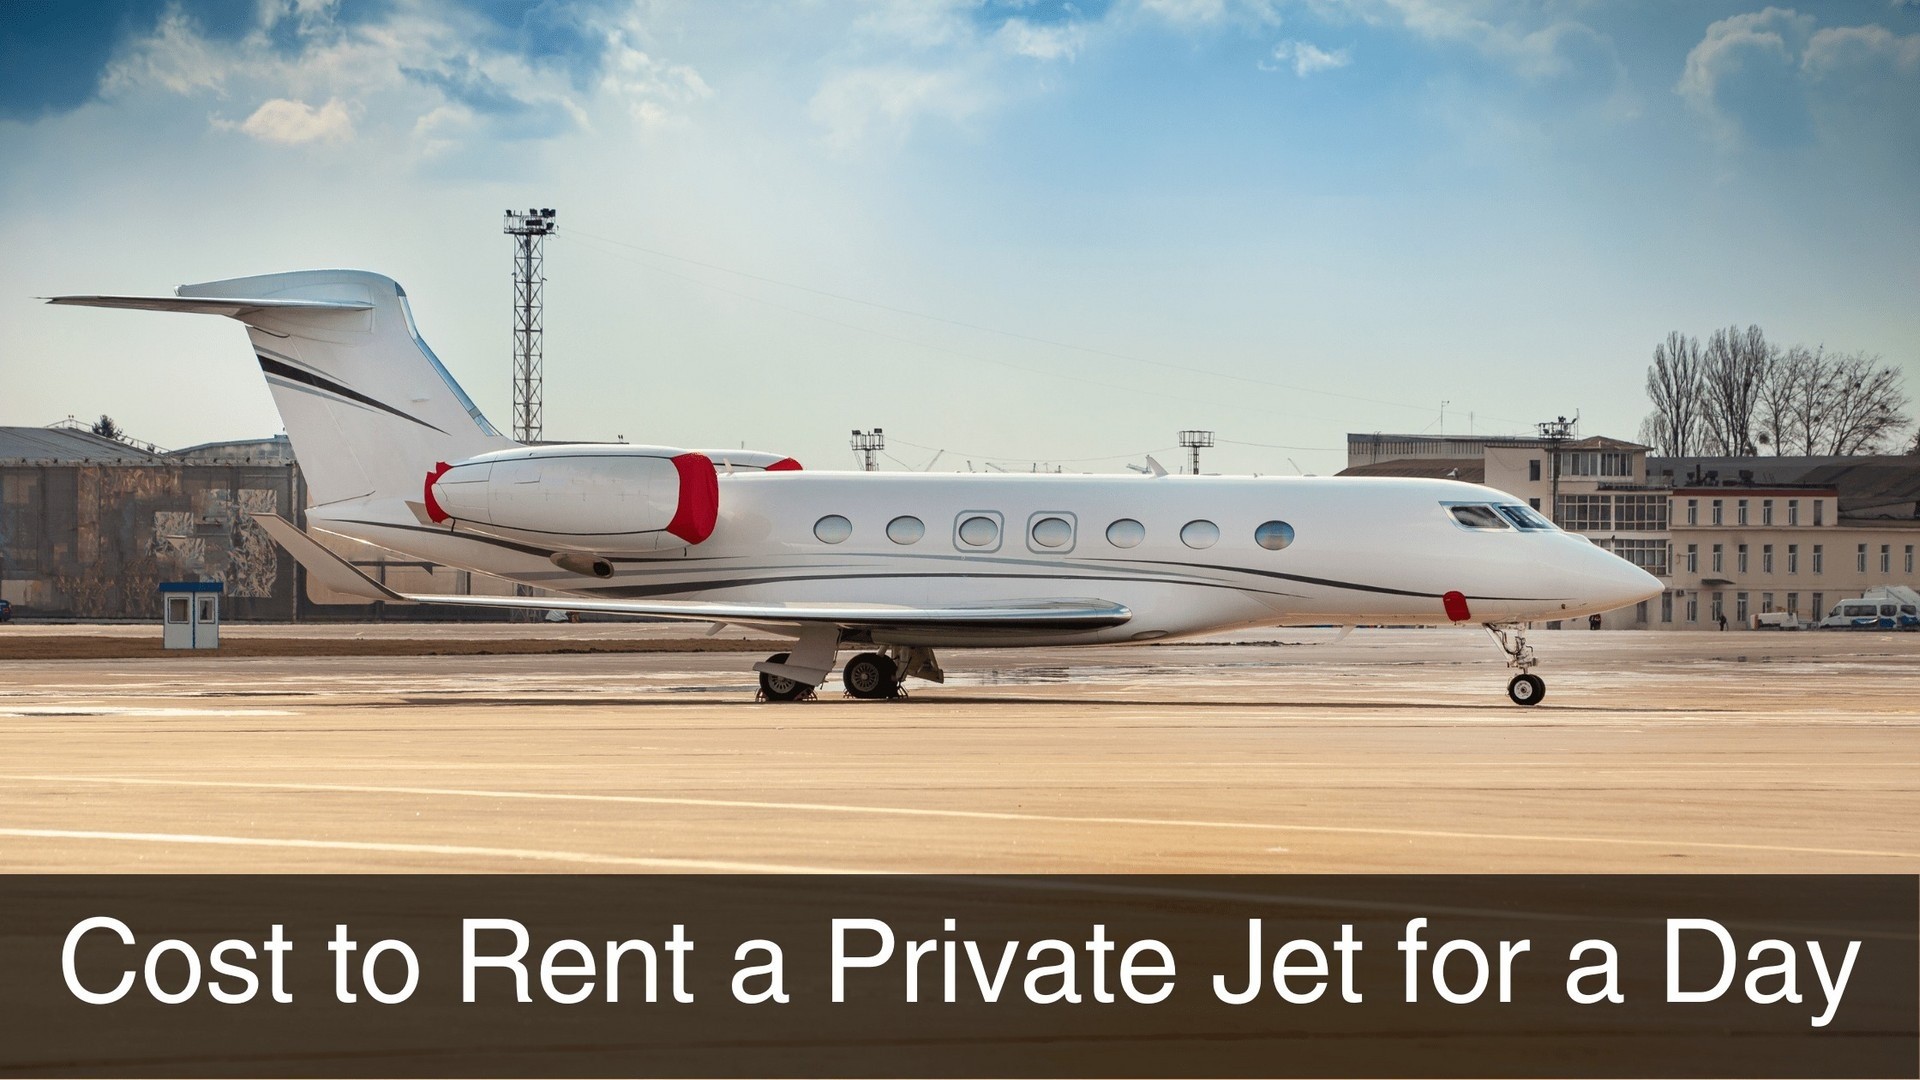 How Much Does It Cost to Rent a Private Jet for a Day